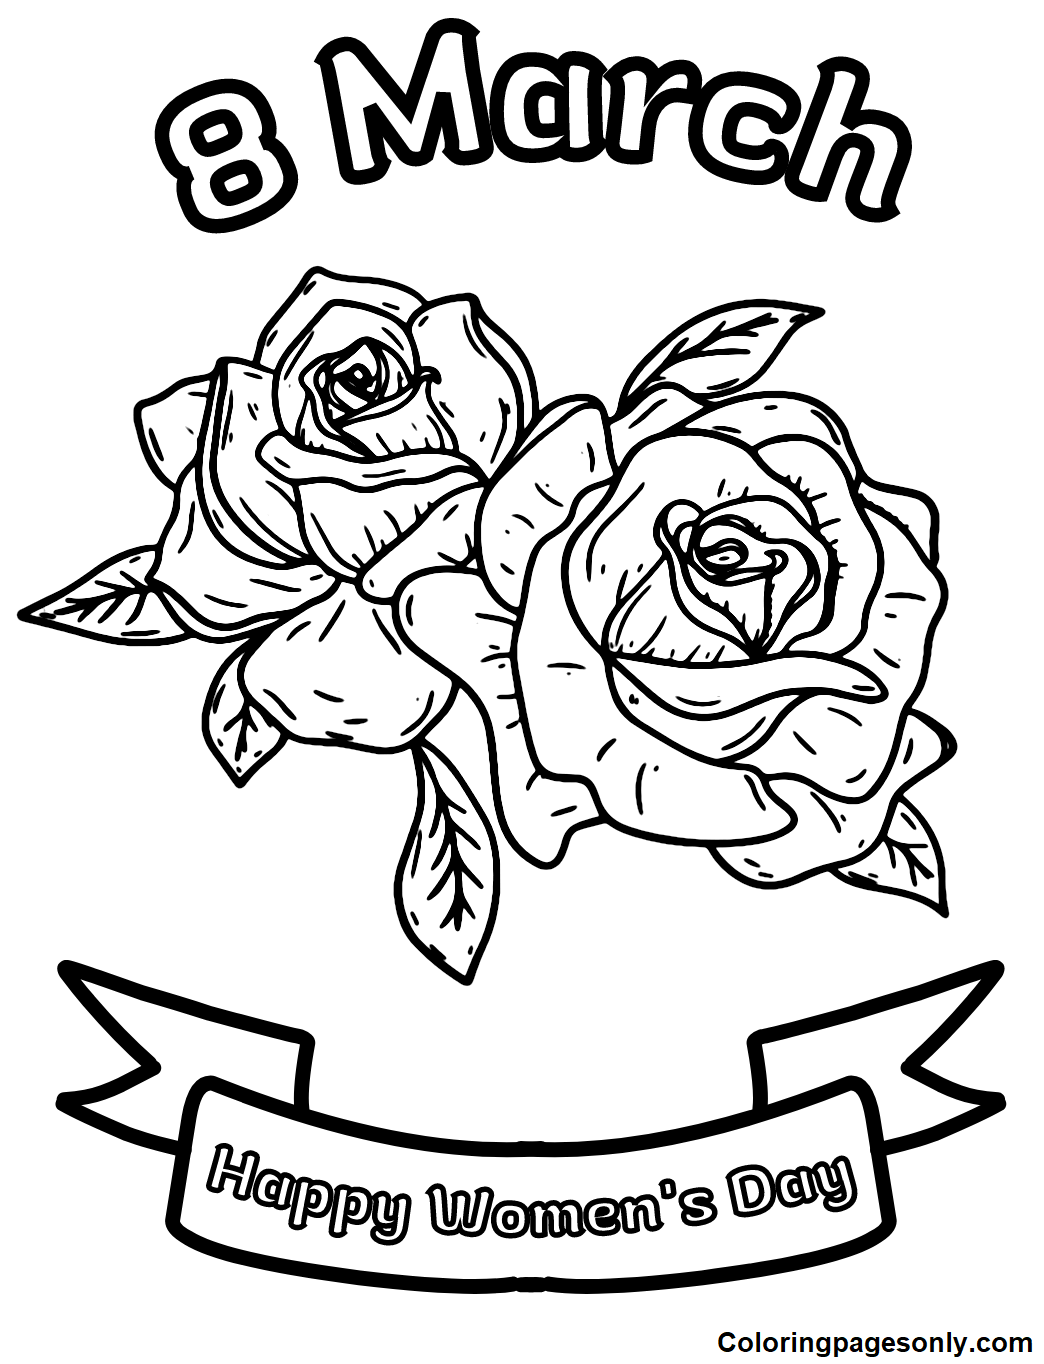 8 March Women’s Day Coloring Pages